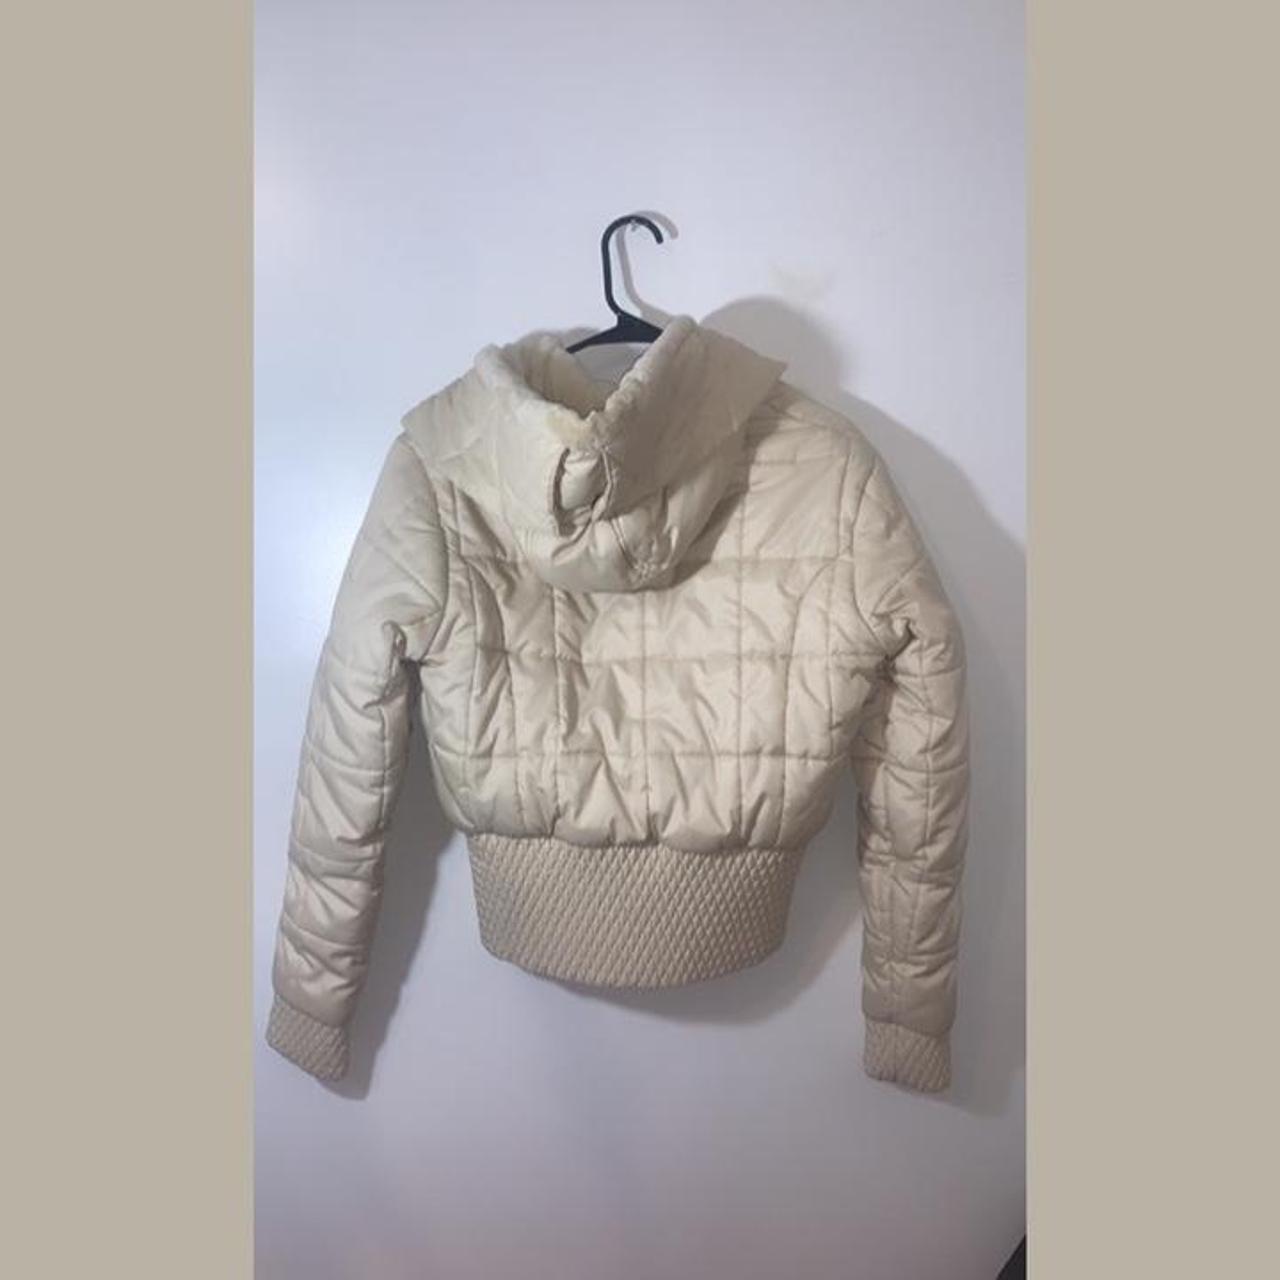 Cream Puffer Jacket with hoodie. Size small. Fits a... - Depop